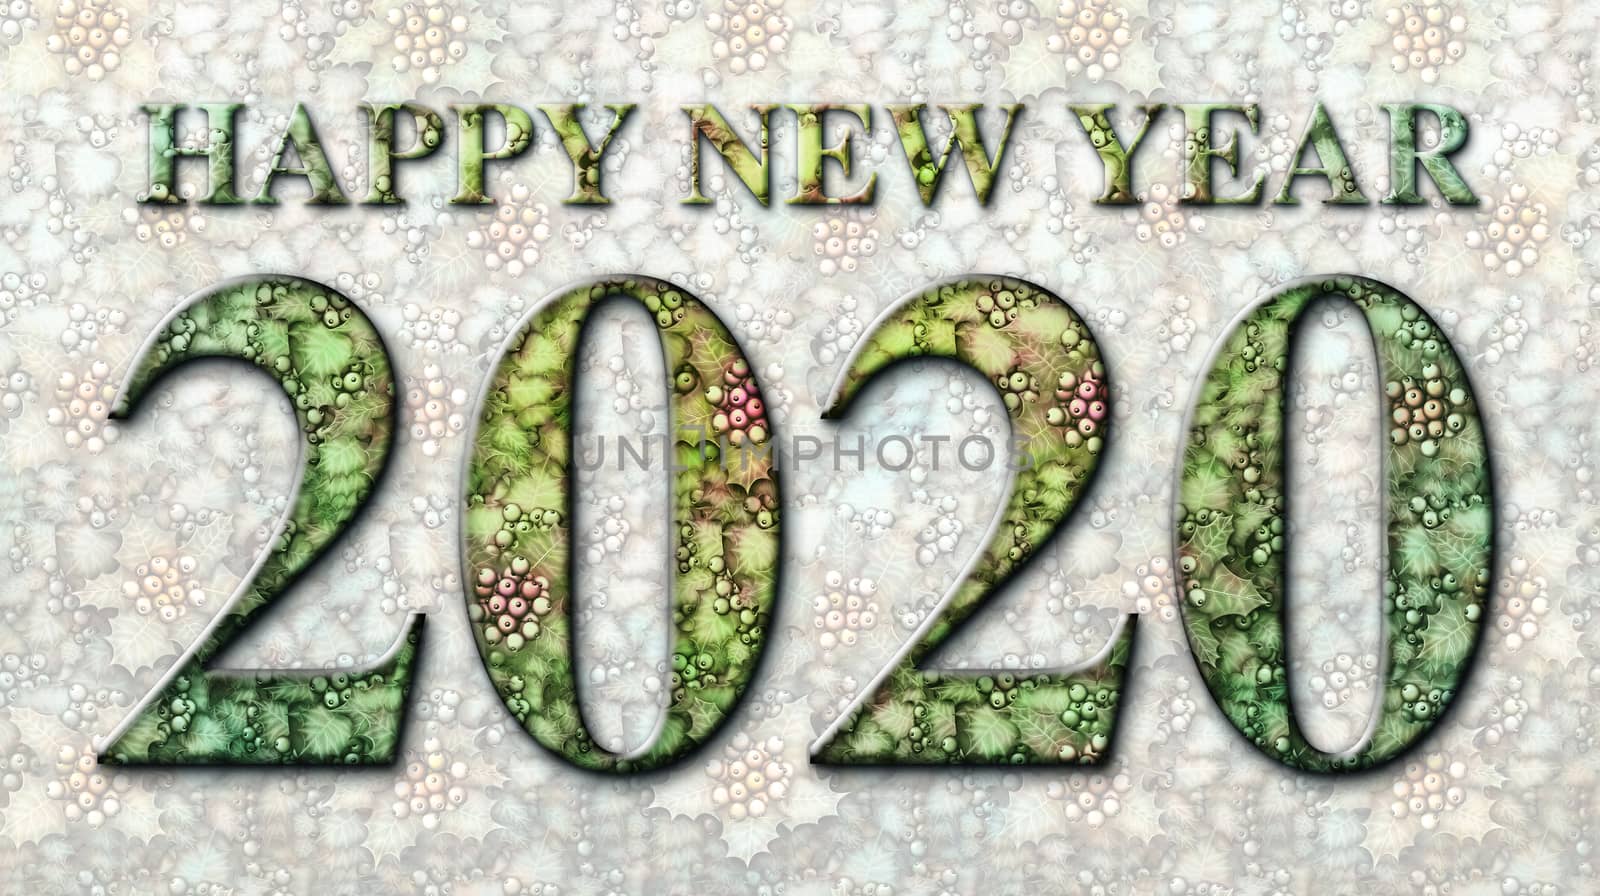 3D illustration of the words Happy New Year 2020 integrated with a background of Holly plants.